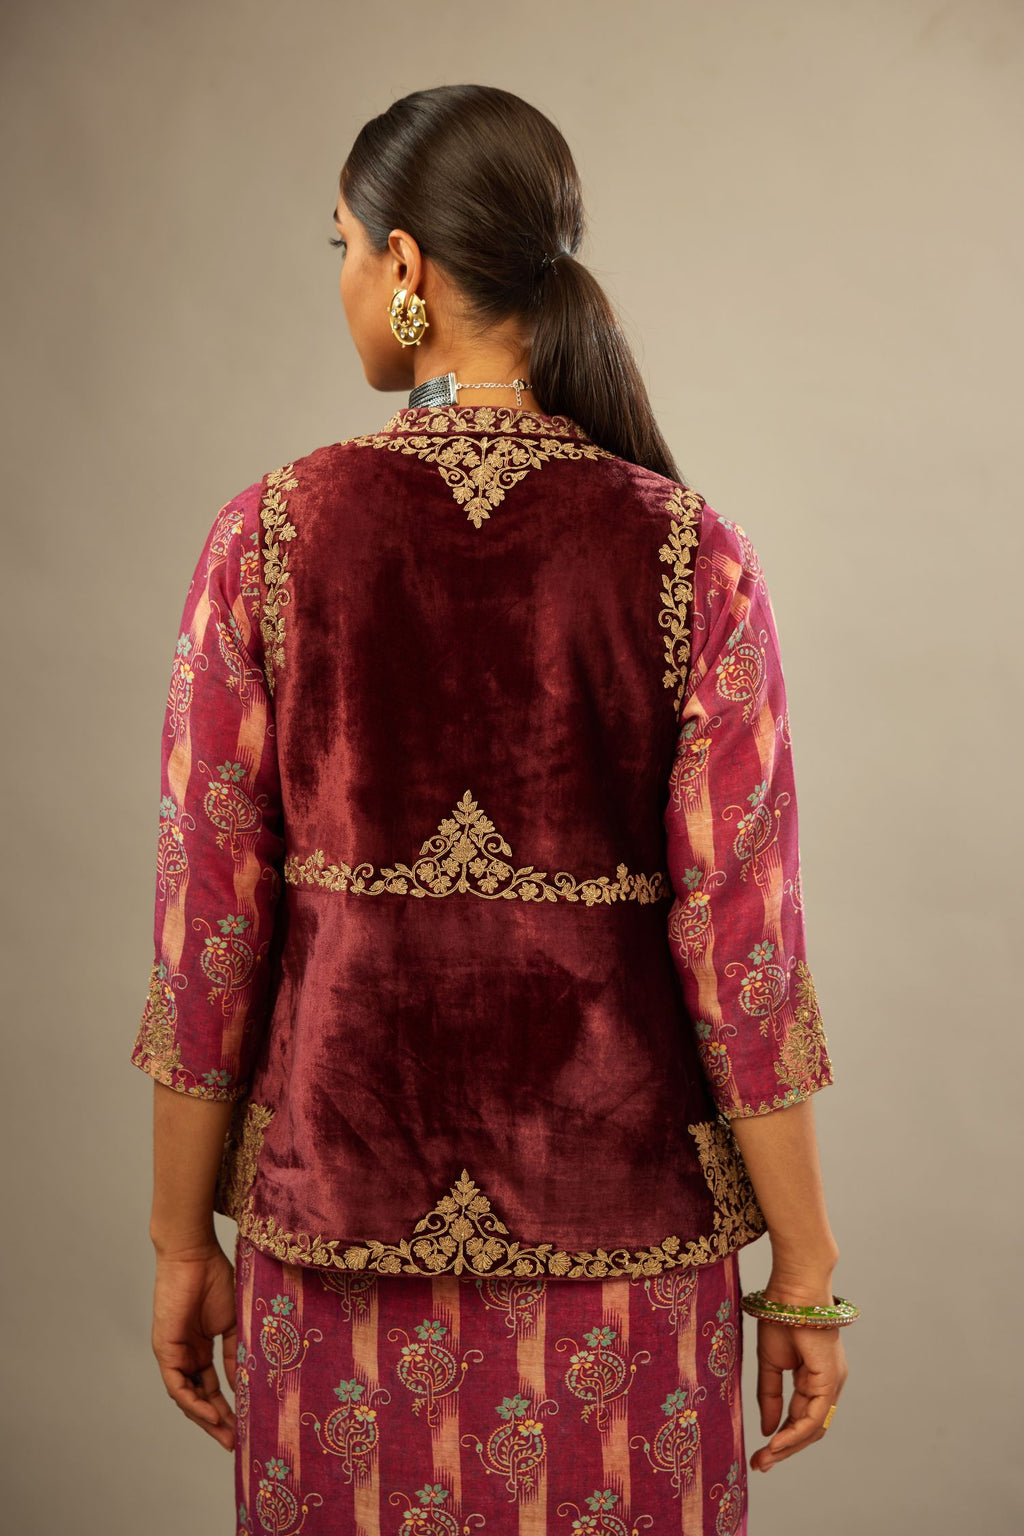 Maroon easy fit, short, sleeveless, silk-velvet jacket, embellished with antique gold embroidery. .